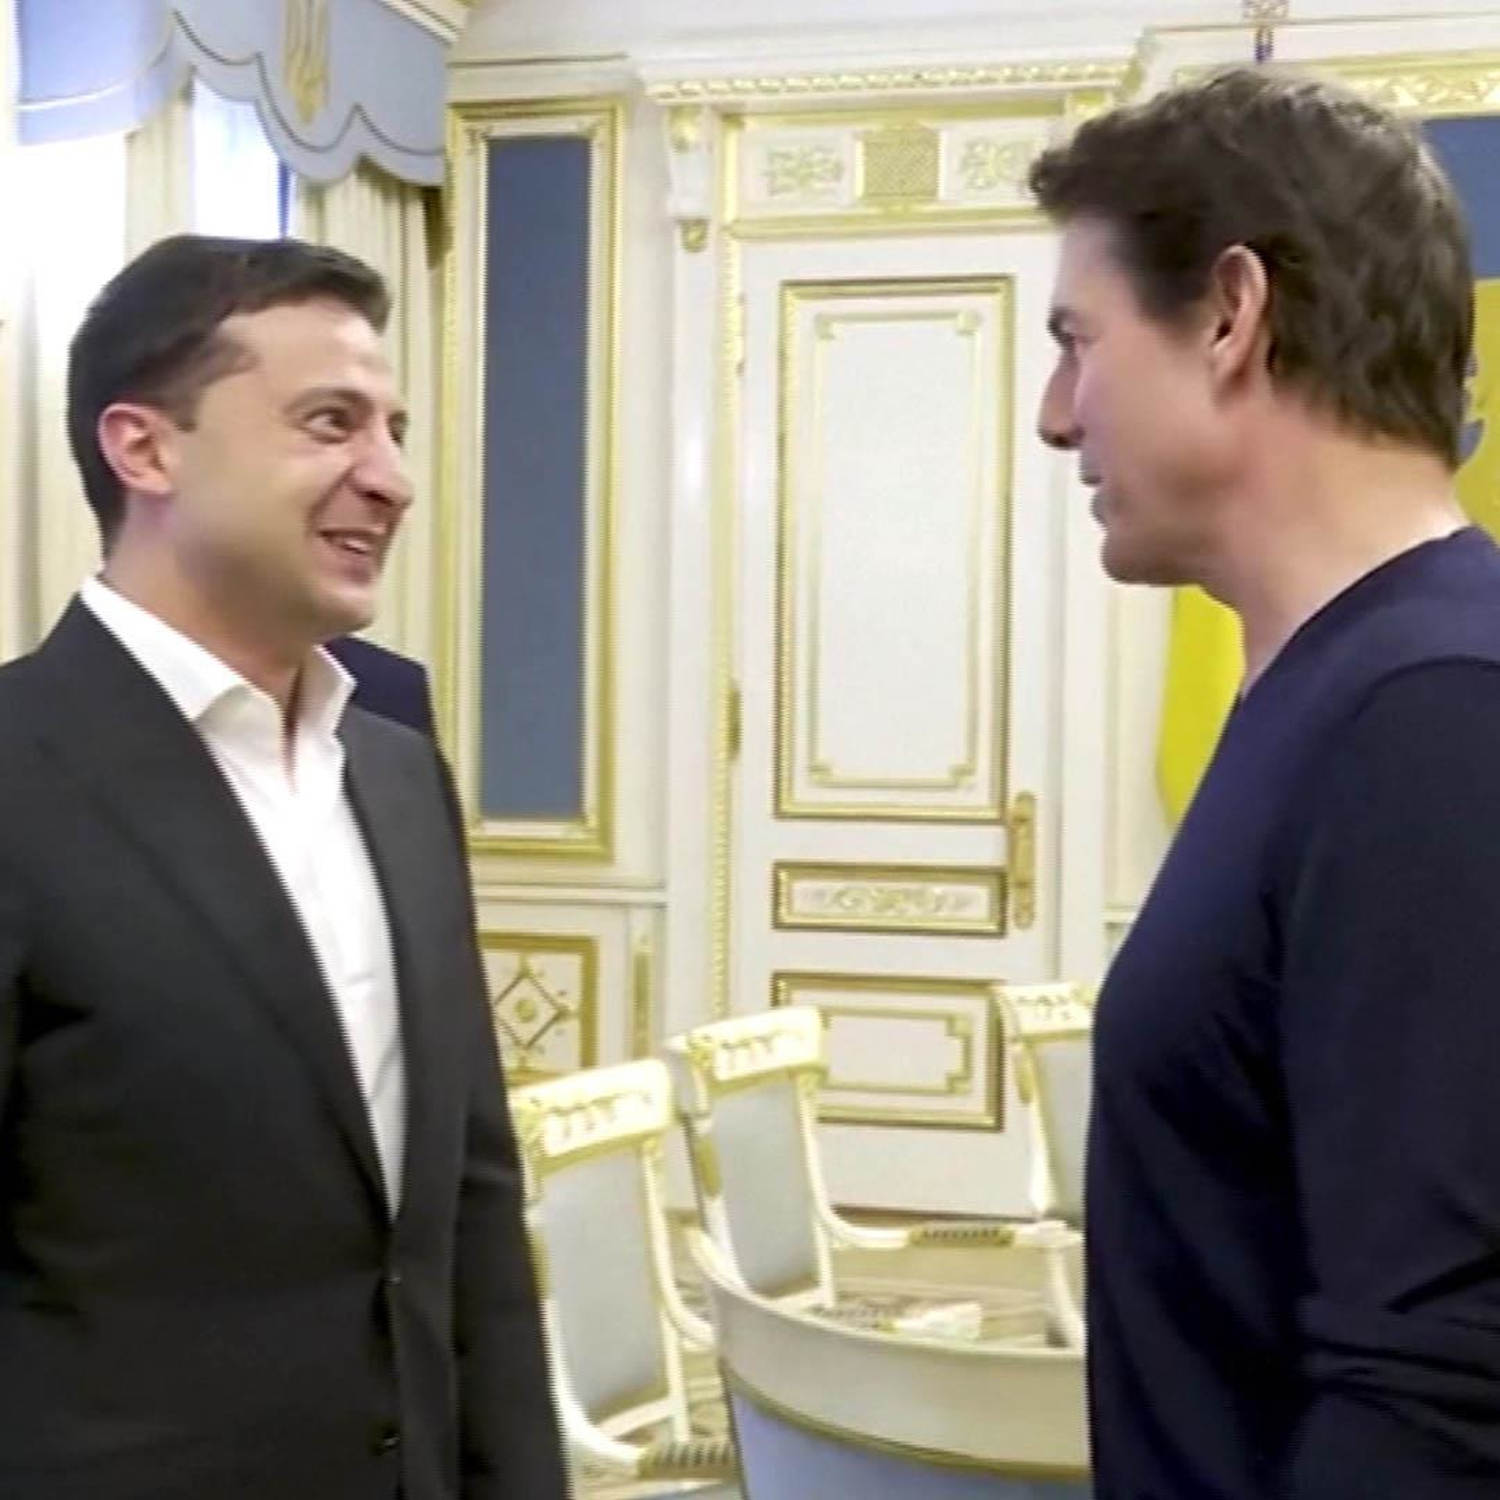 Tom Cruise meets Ukraine's President Zelenskiy while reportedly scouting movie locations